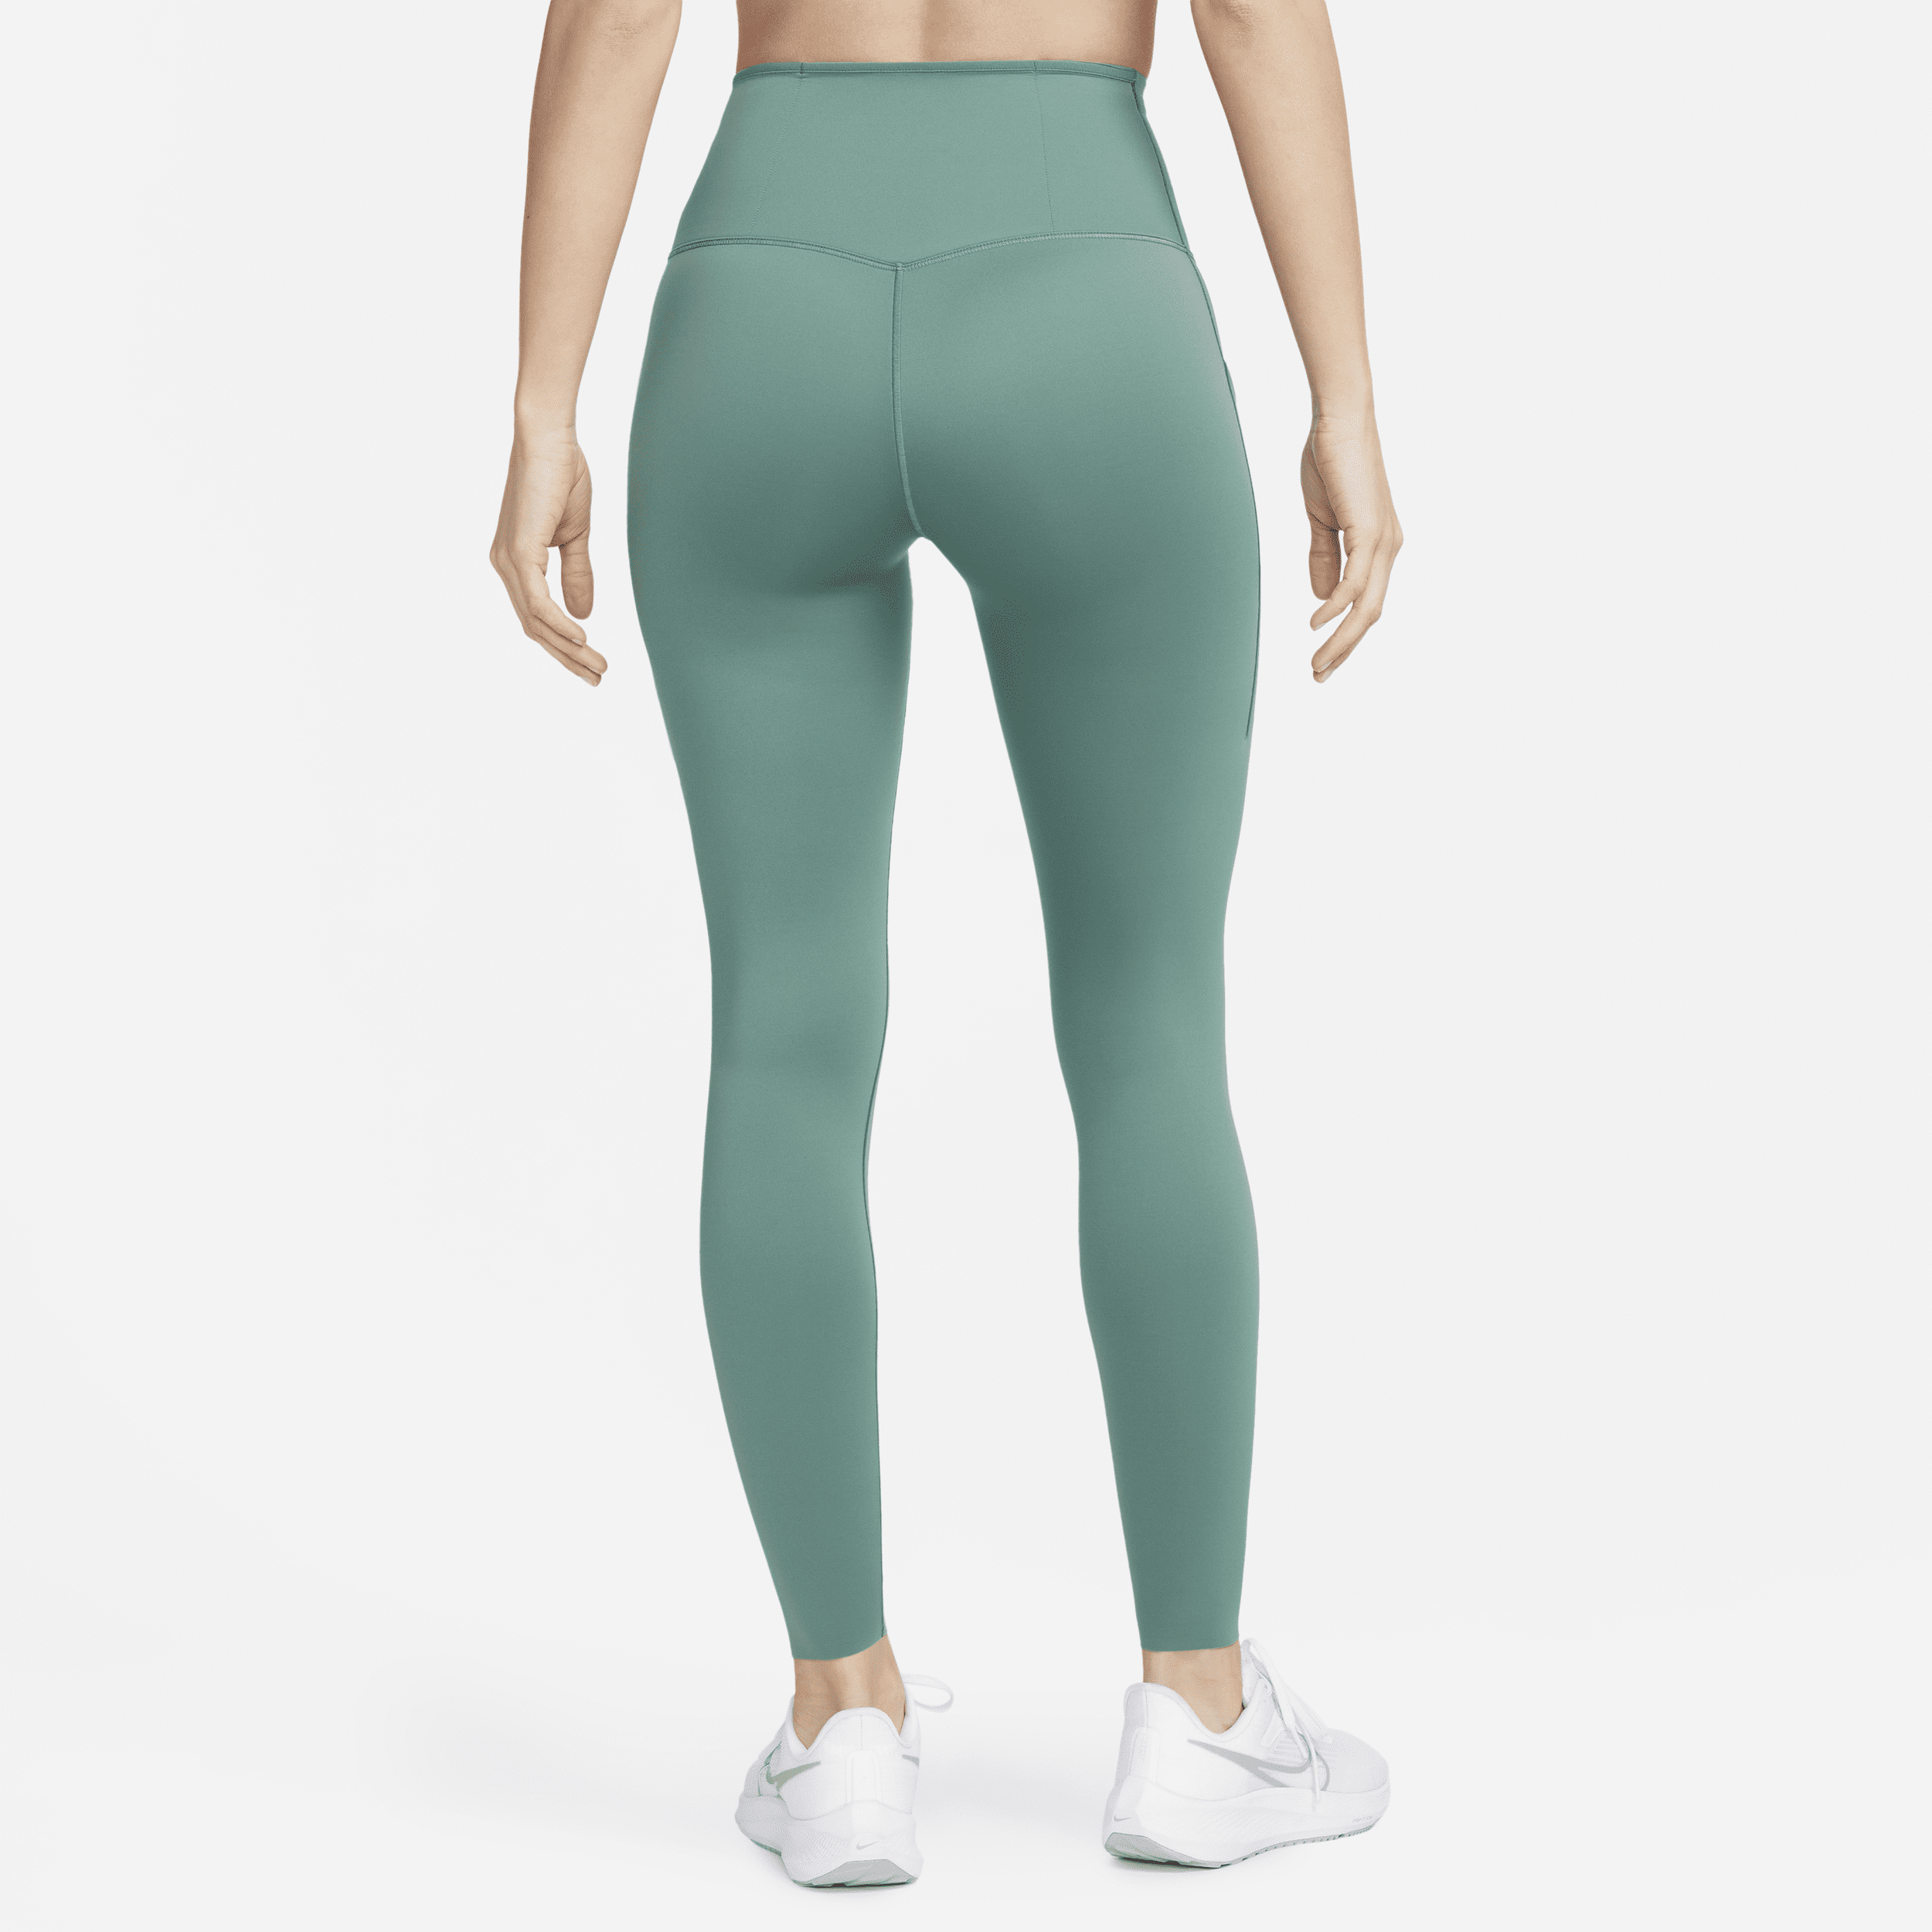 Fabletics leggings review: Do the PowerHold leggings live up to the hype?